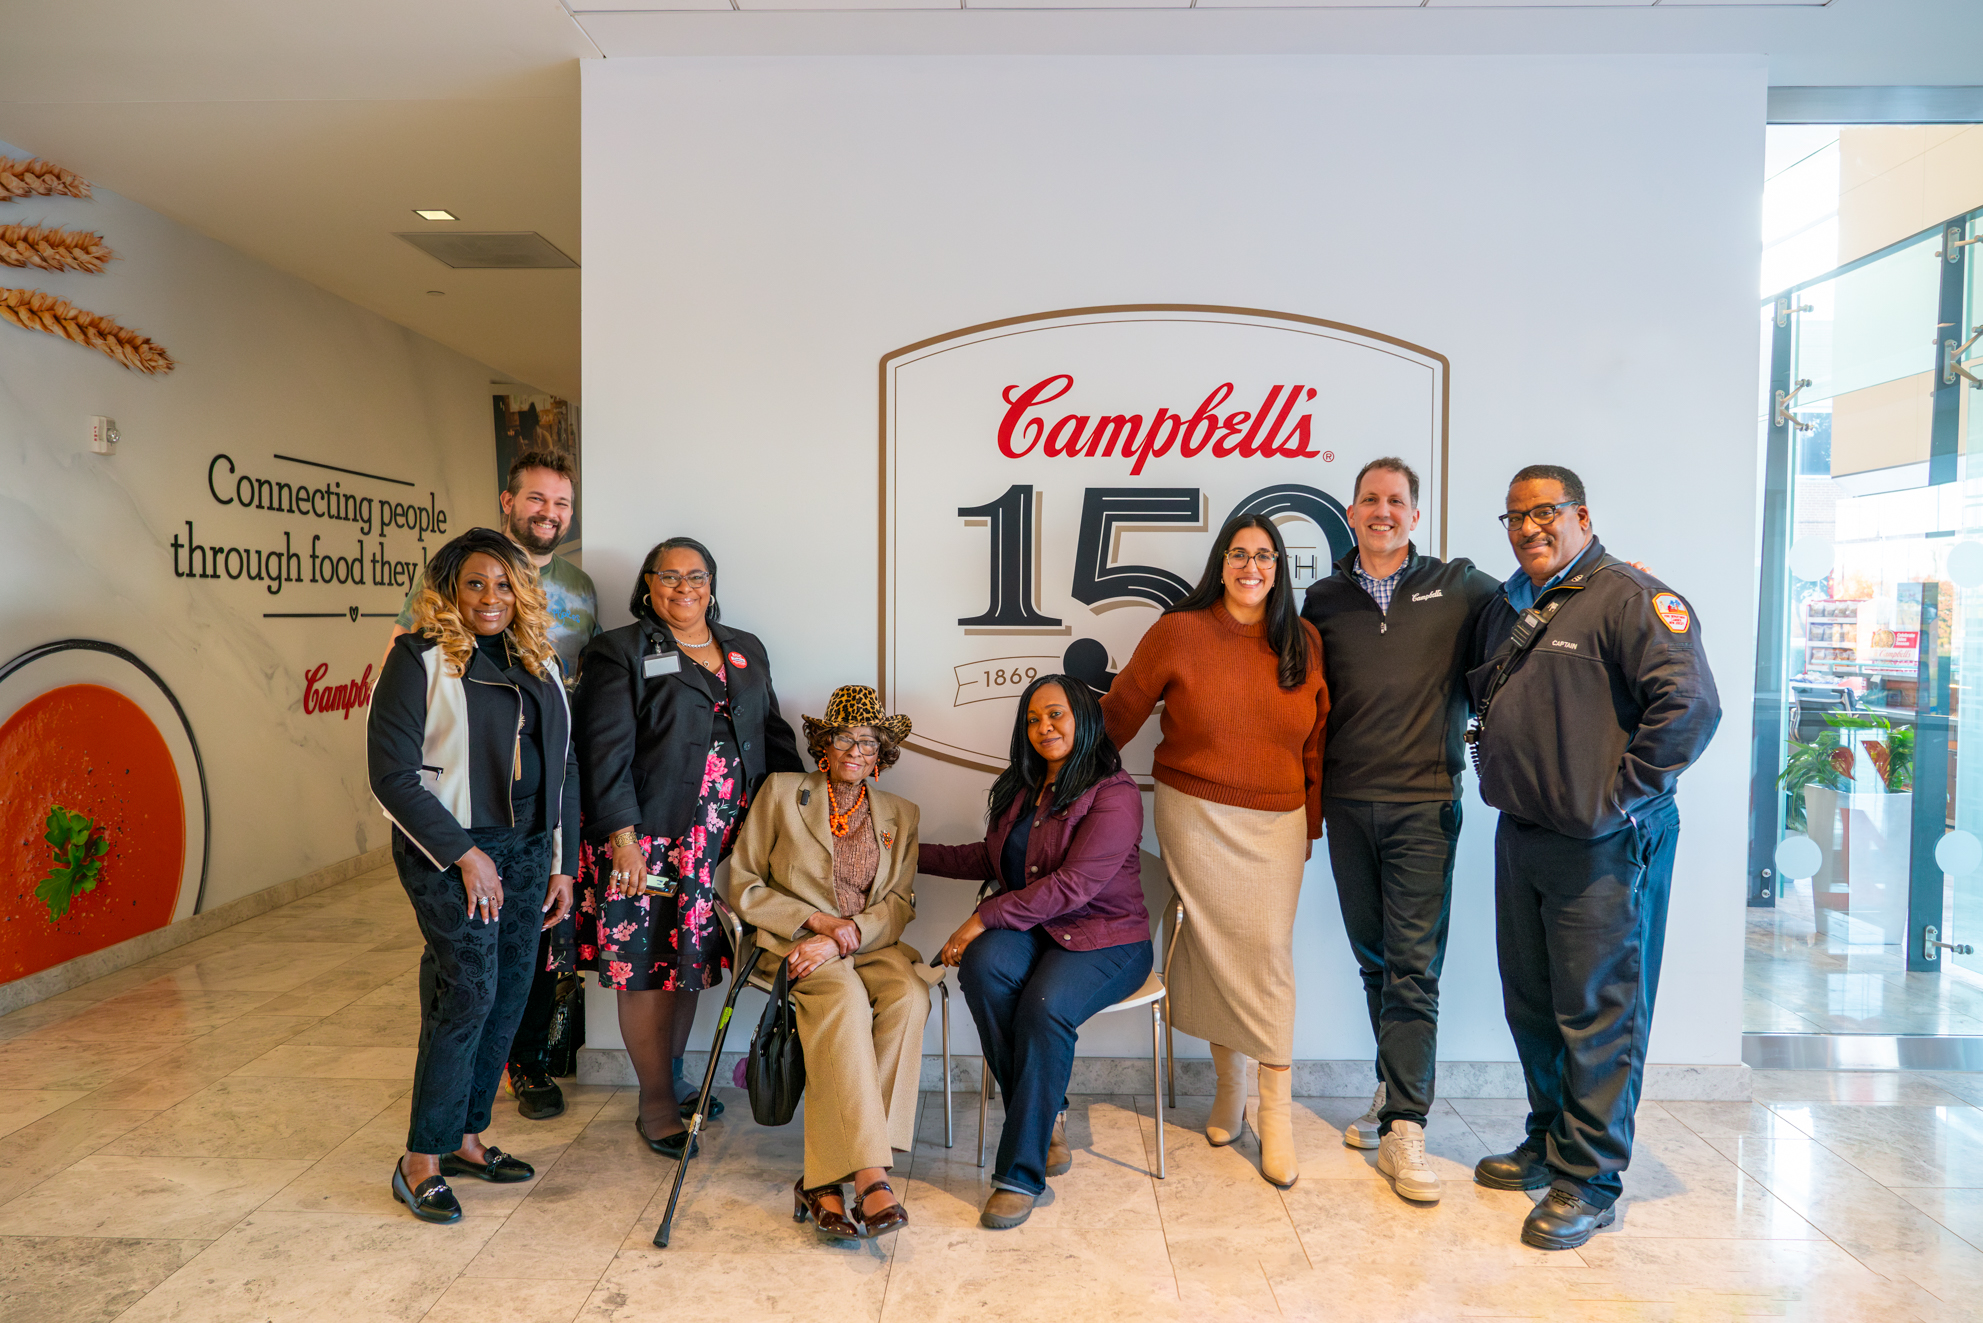 Daisy Lee with her family and Campbell’s employees.